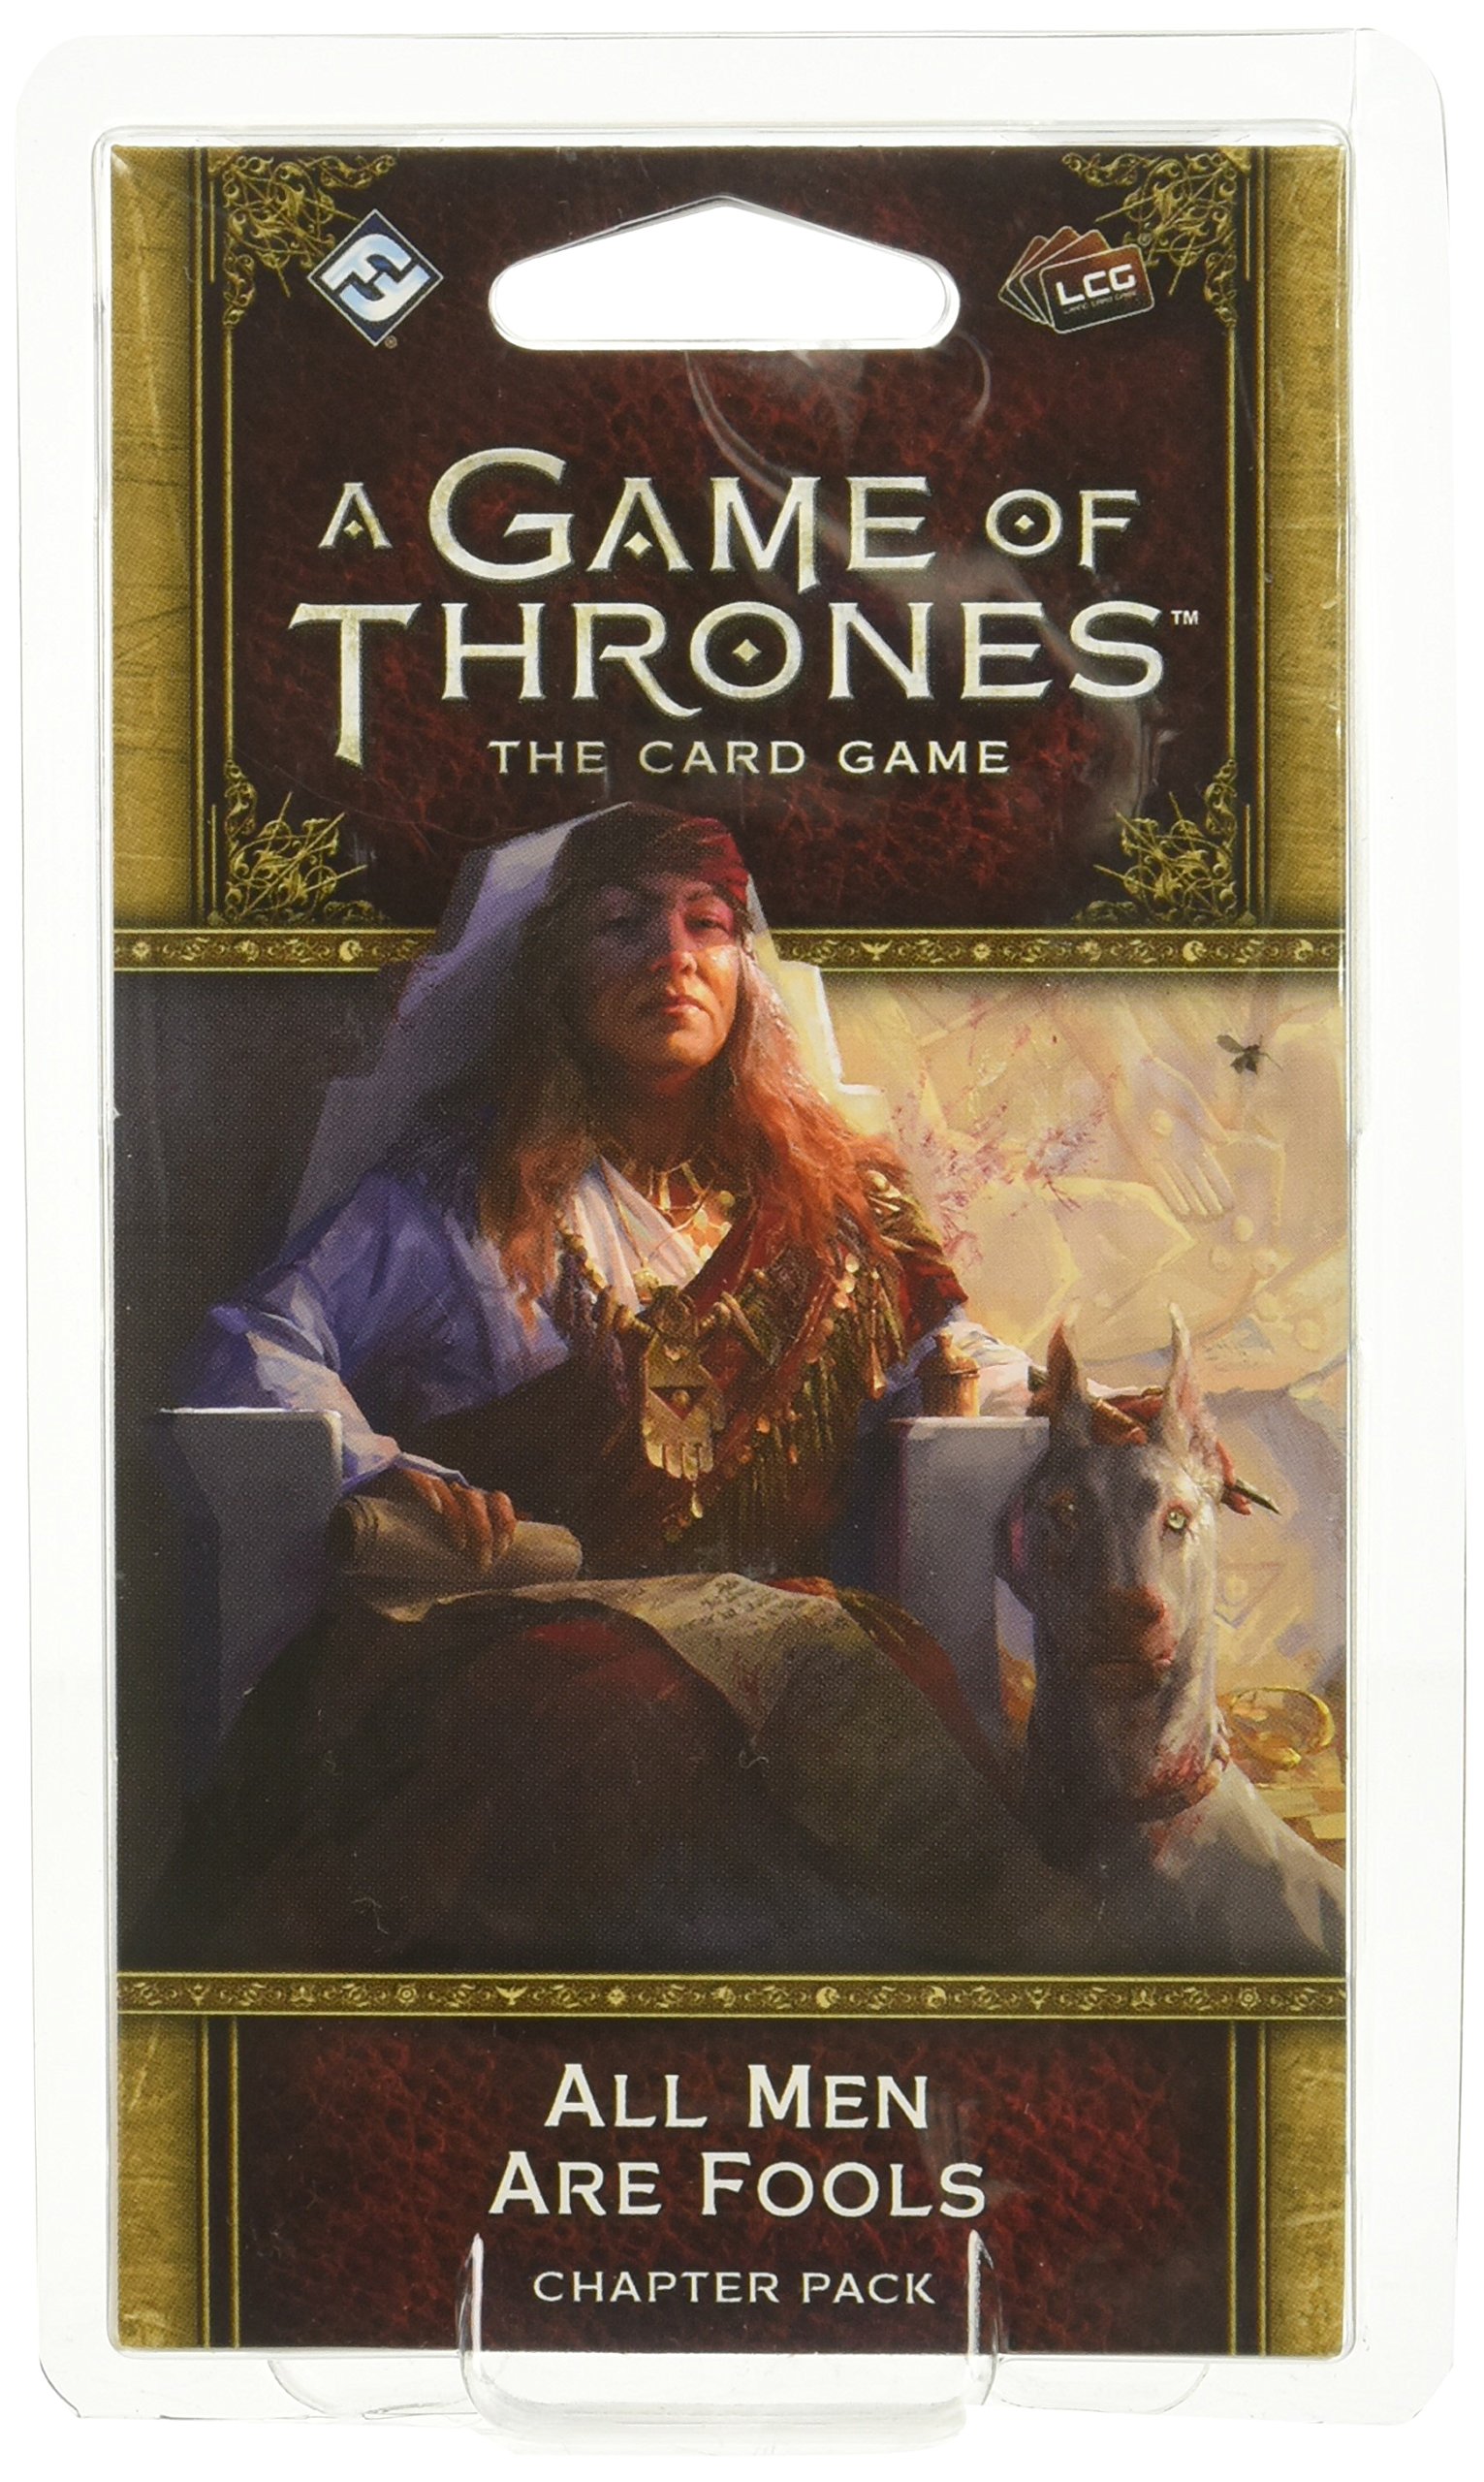 A Game of Thrones LCG Second Edition: All Men Are Fools